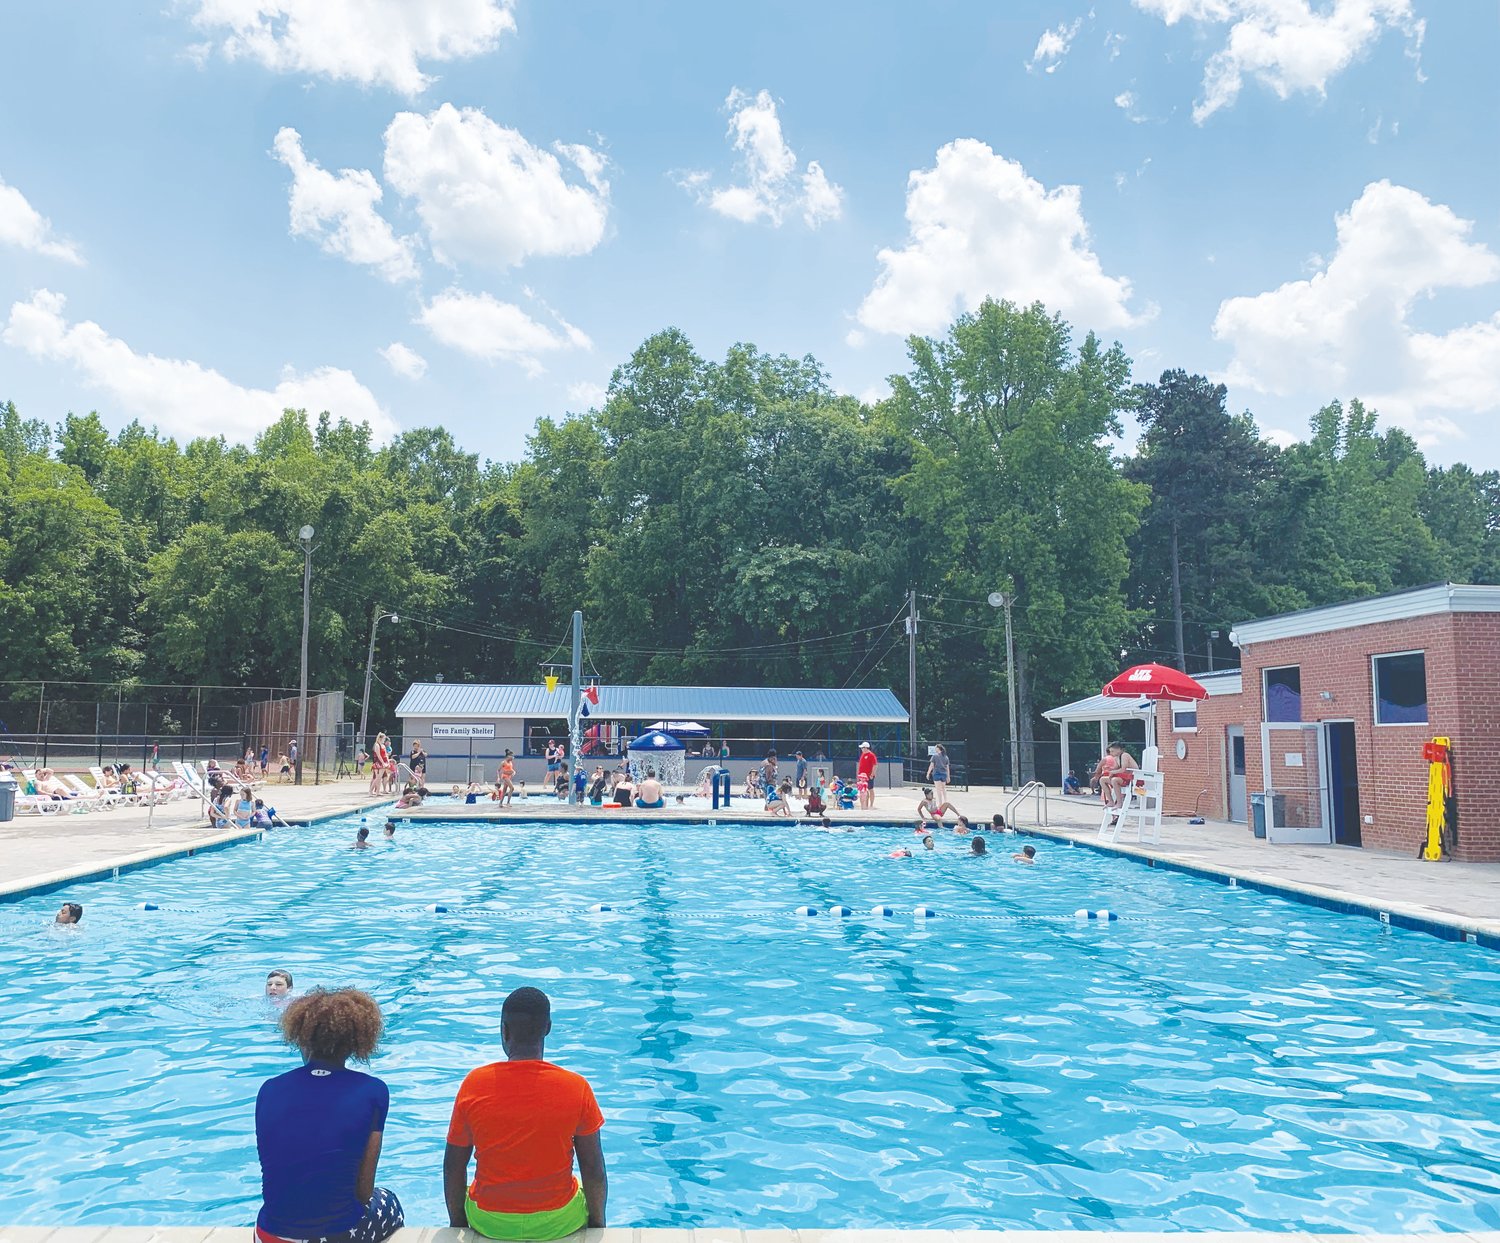 Siler City residents enjoy the sun at Bray Park Aquatic Facility in May 2019. The pool is open to the public every day this summer from 12-6 p.m. with a $5 admission fee.